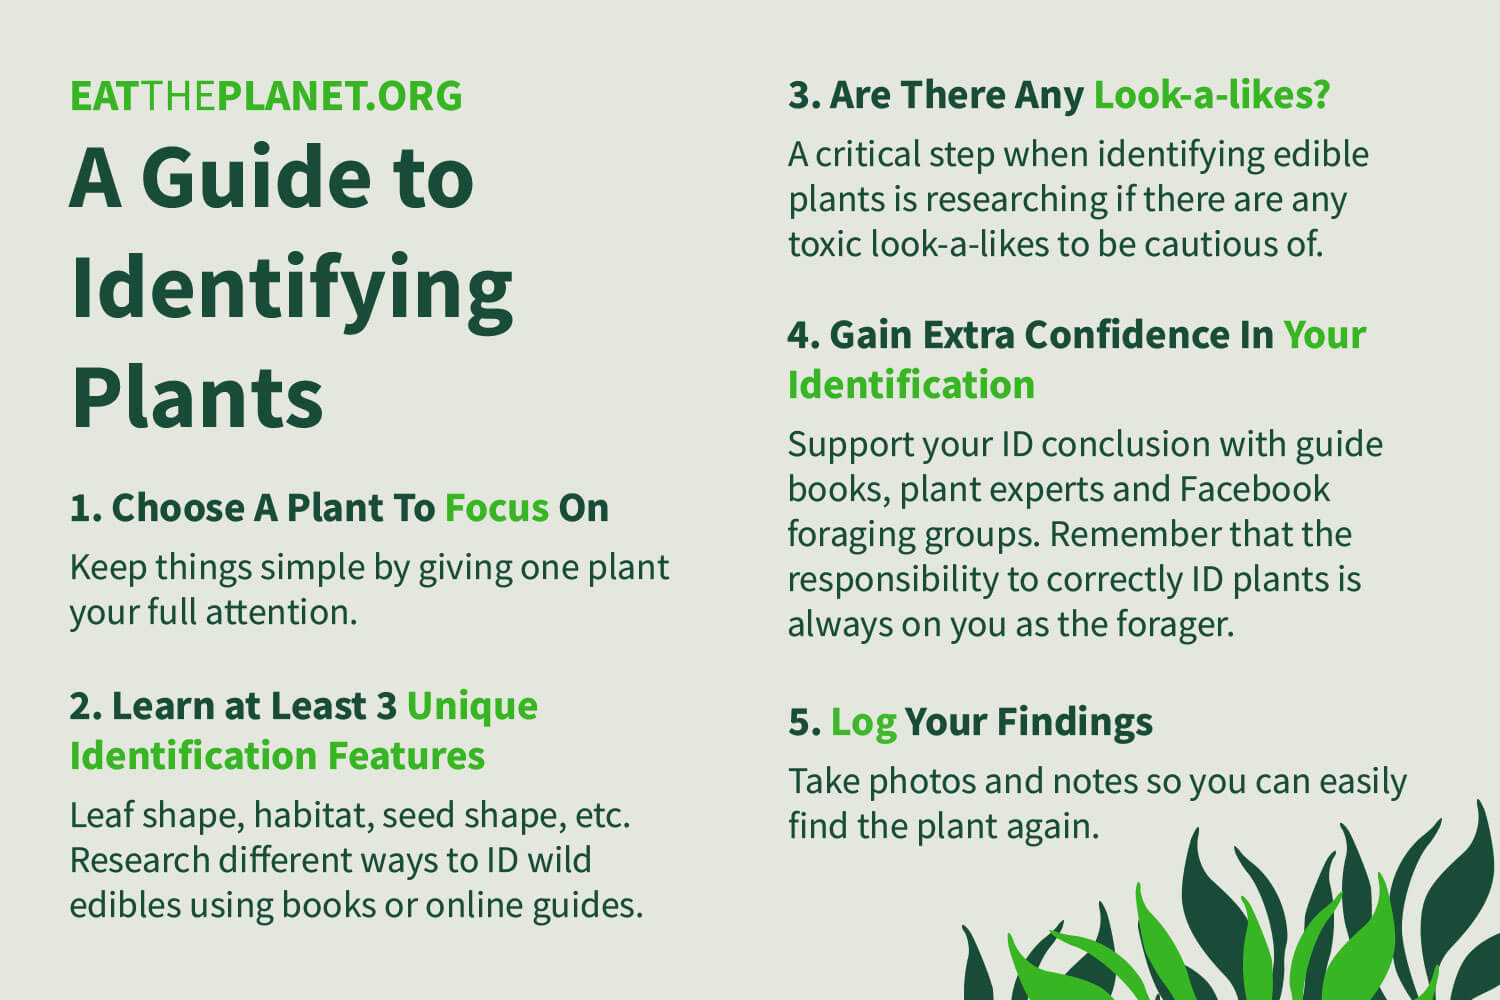 A concise graphic outlining the 5 recommended steps for identifying plants